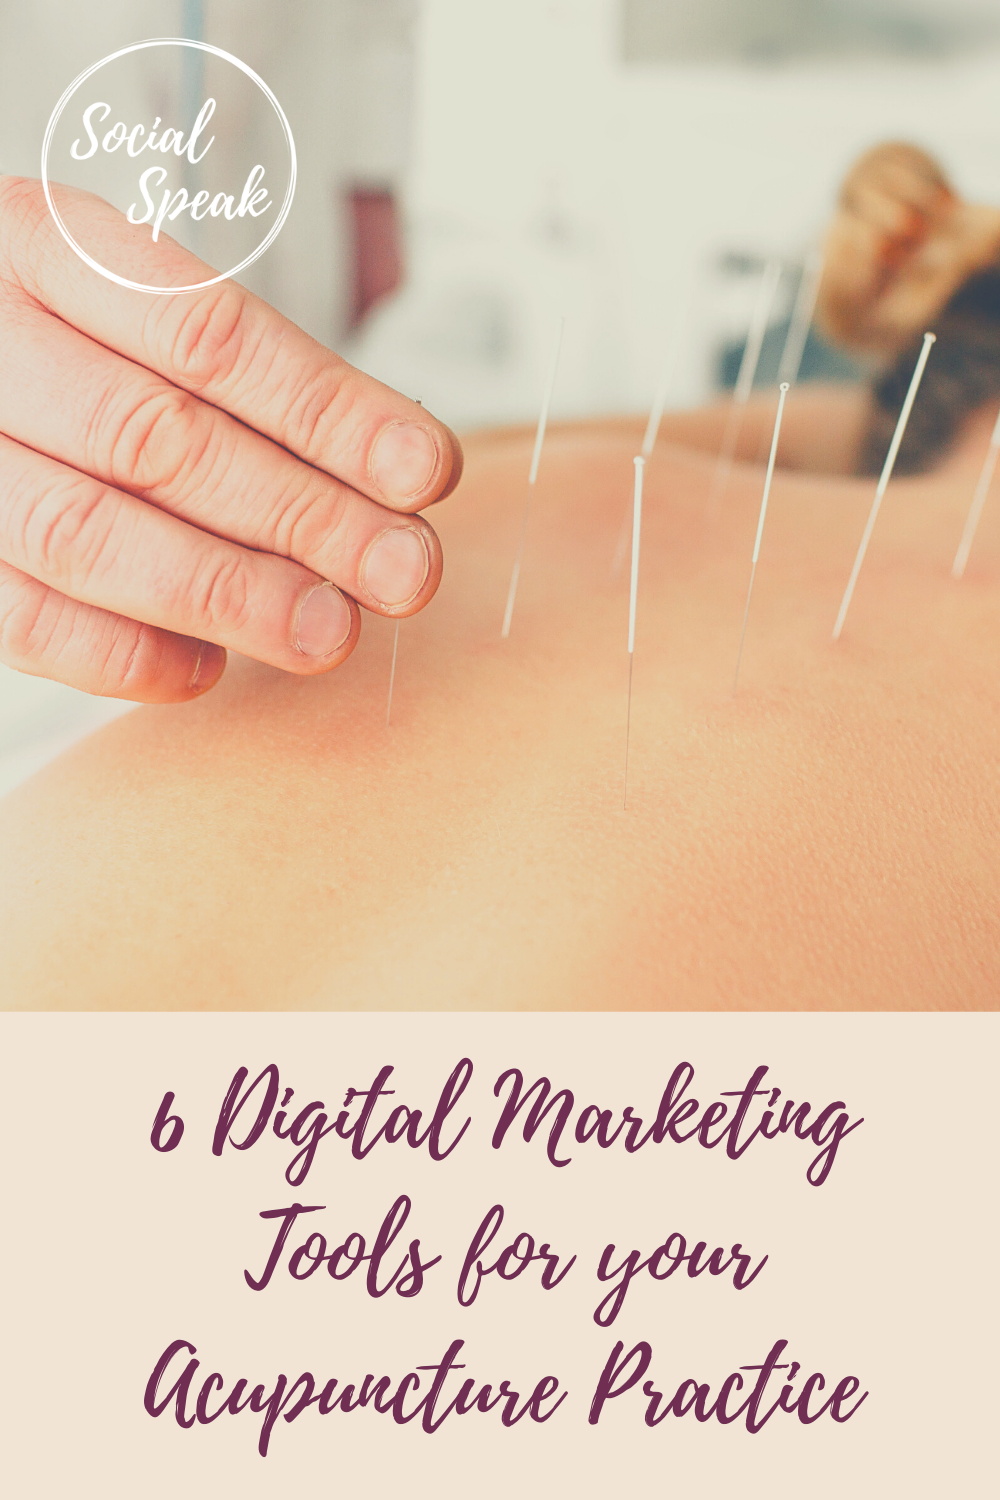 6 Digital Marketing Tools for your Acupuncture Practice